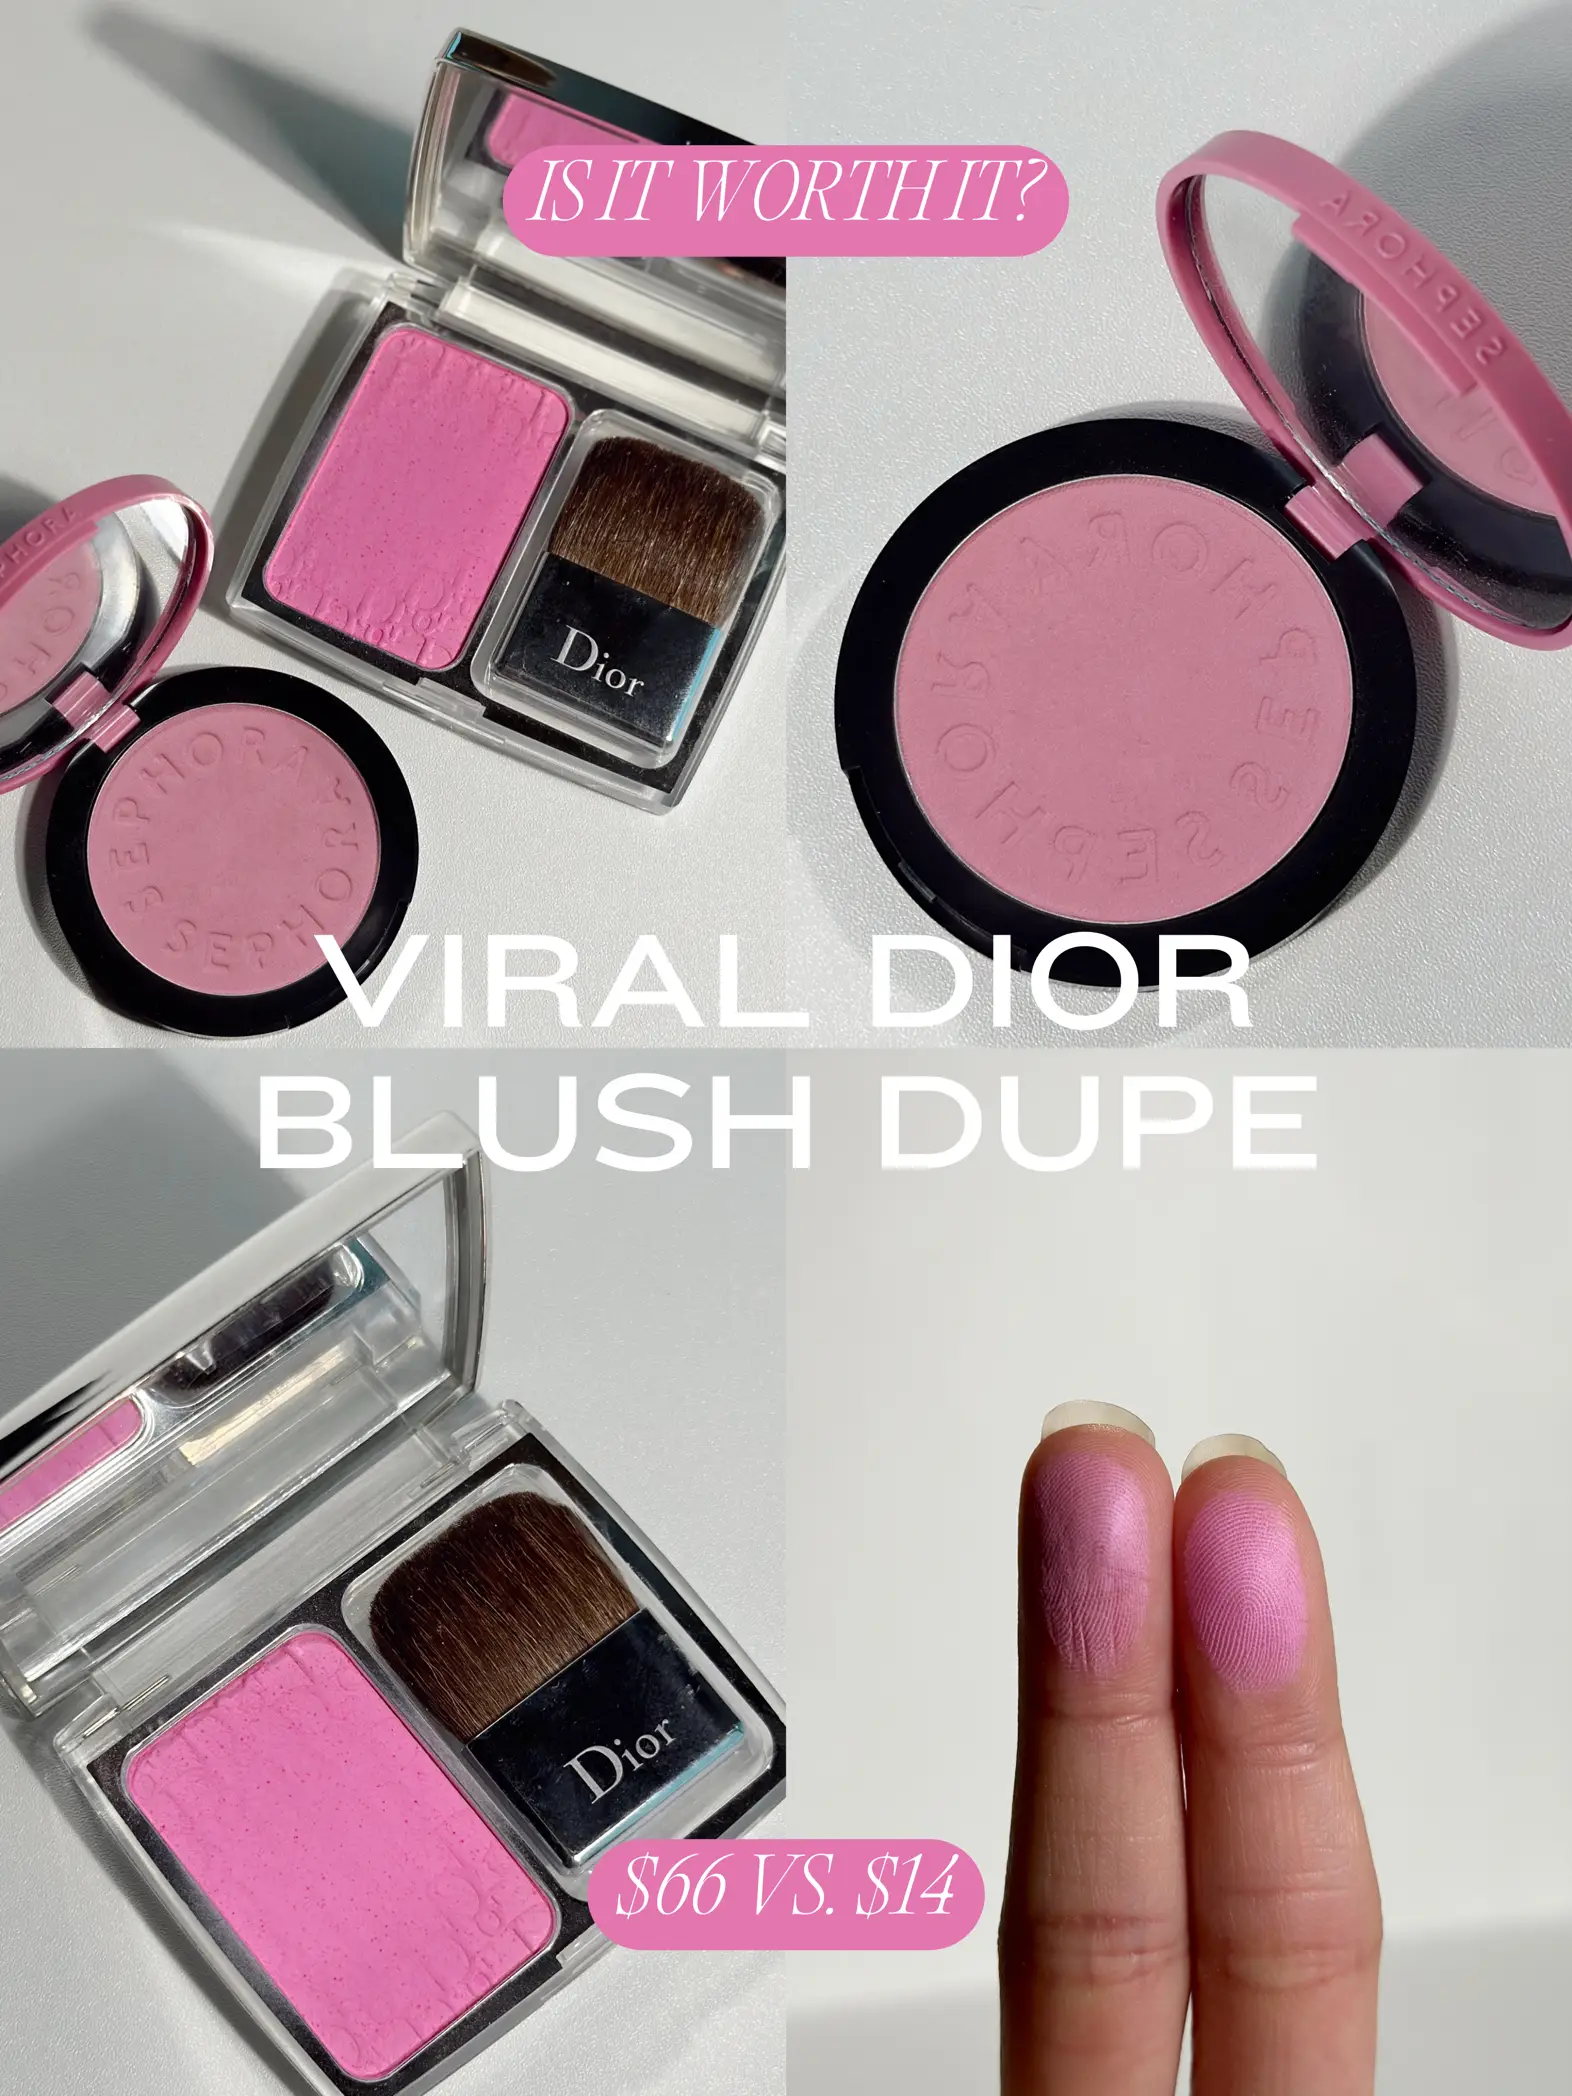 VIRAL DIOR BLUSH DUPE 🥹✨, Gallery posted by Michelle